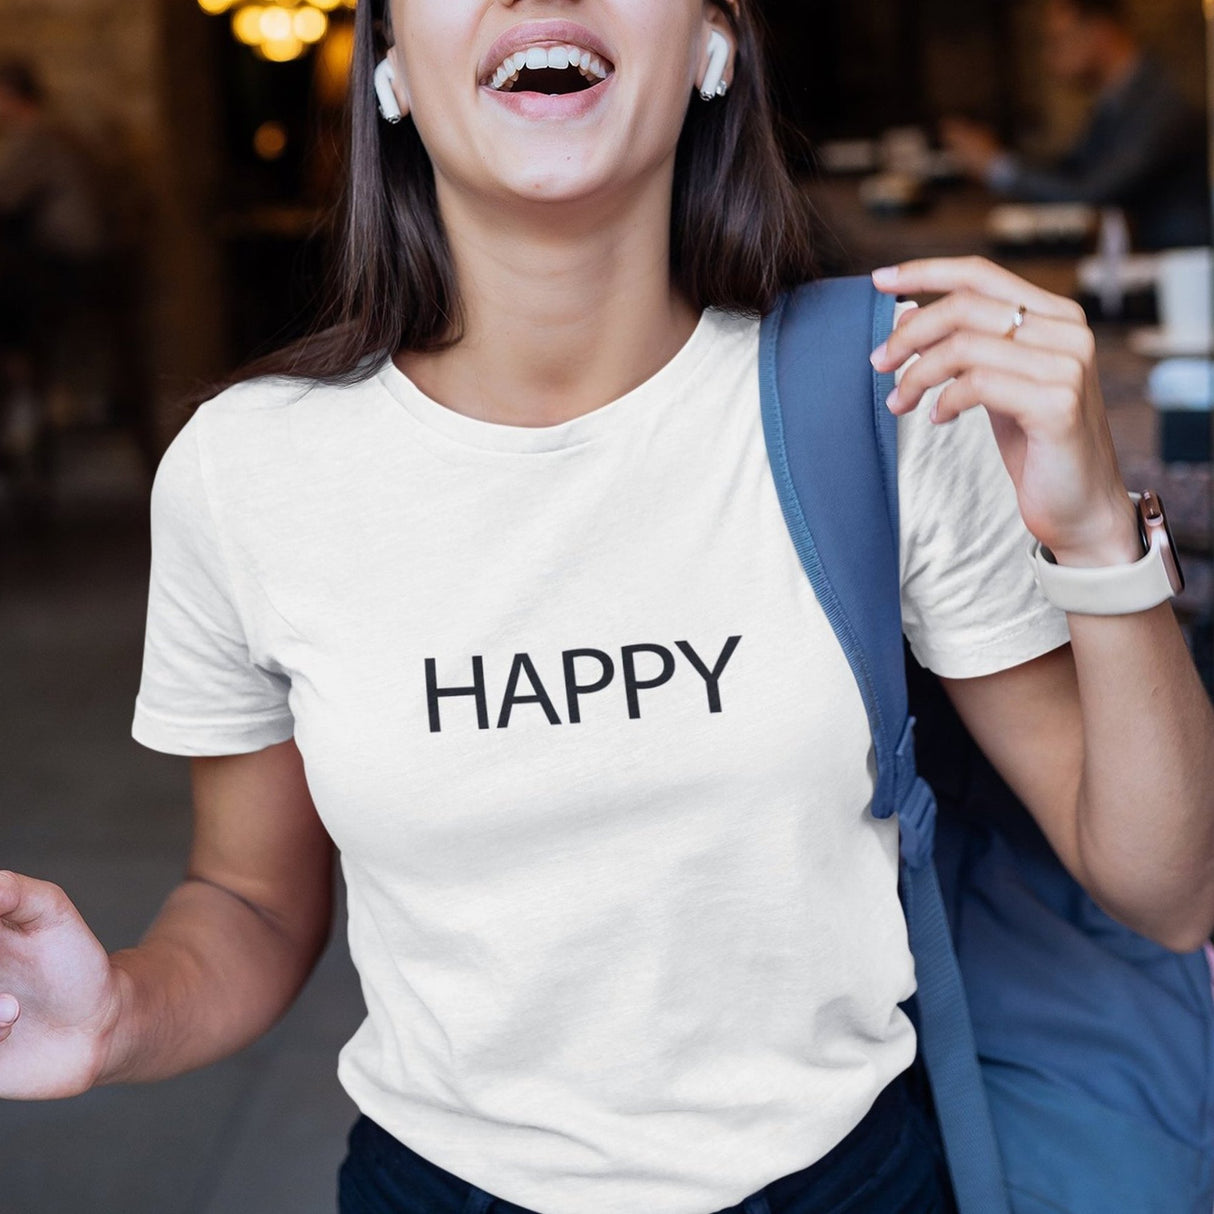 happy-happy-tee-cute-t-shirt-summer-tee-inspirational-t-shirt-motivational-tee#color_white